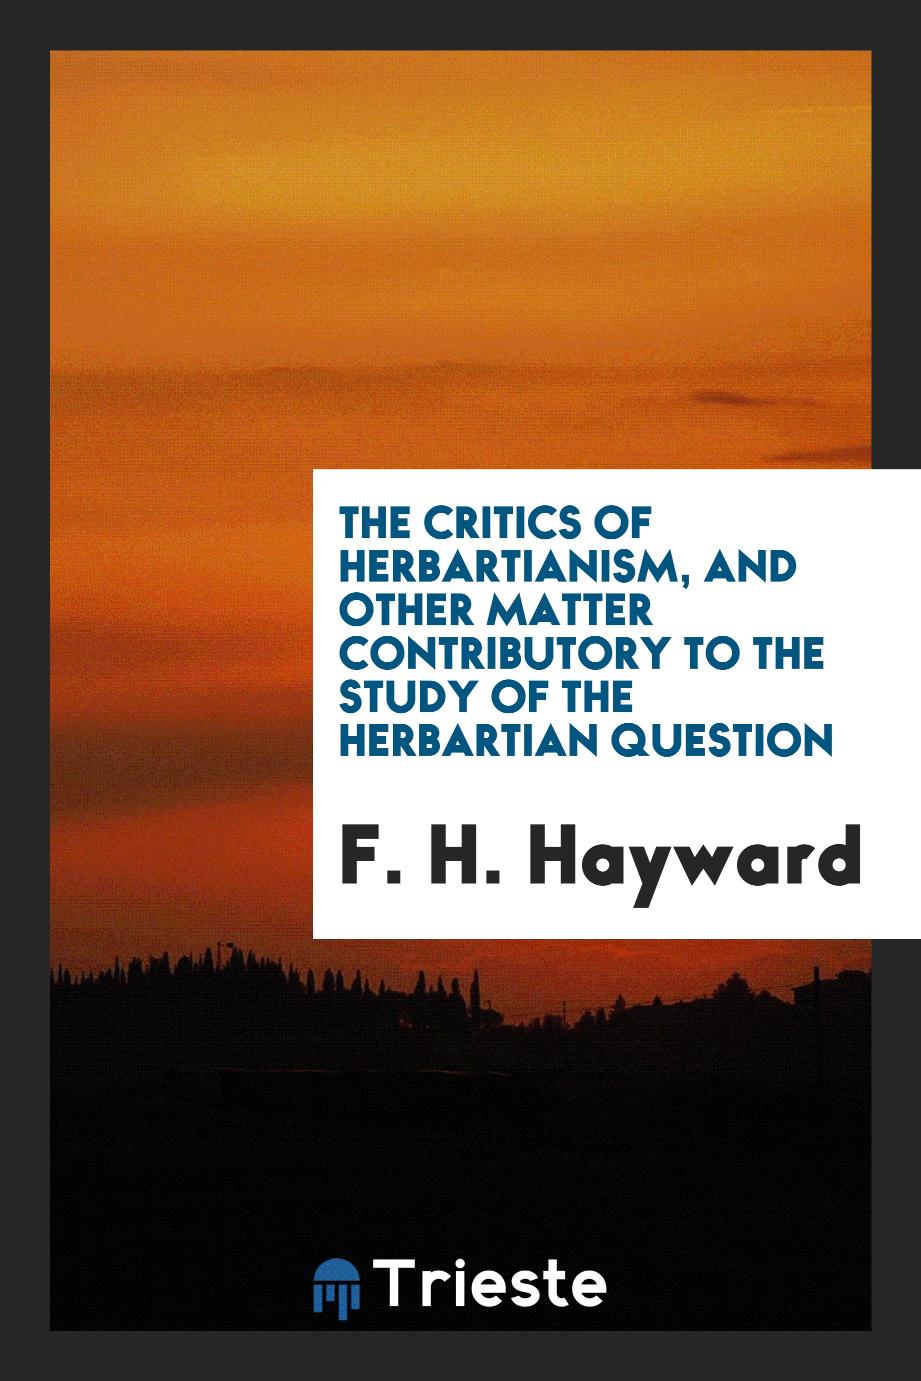 The critics of Herbartianism, and other matter contributory to the study of the Herbartian question